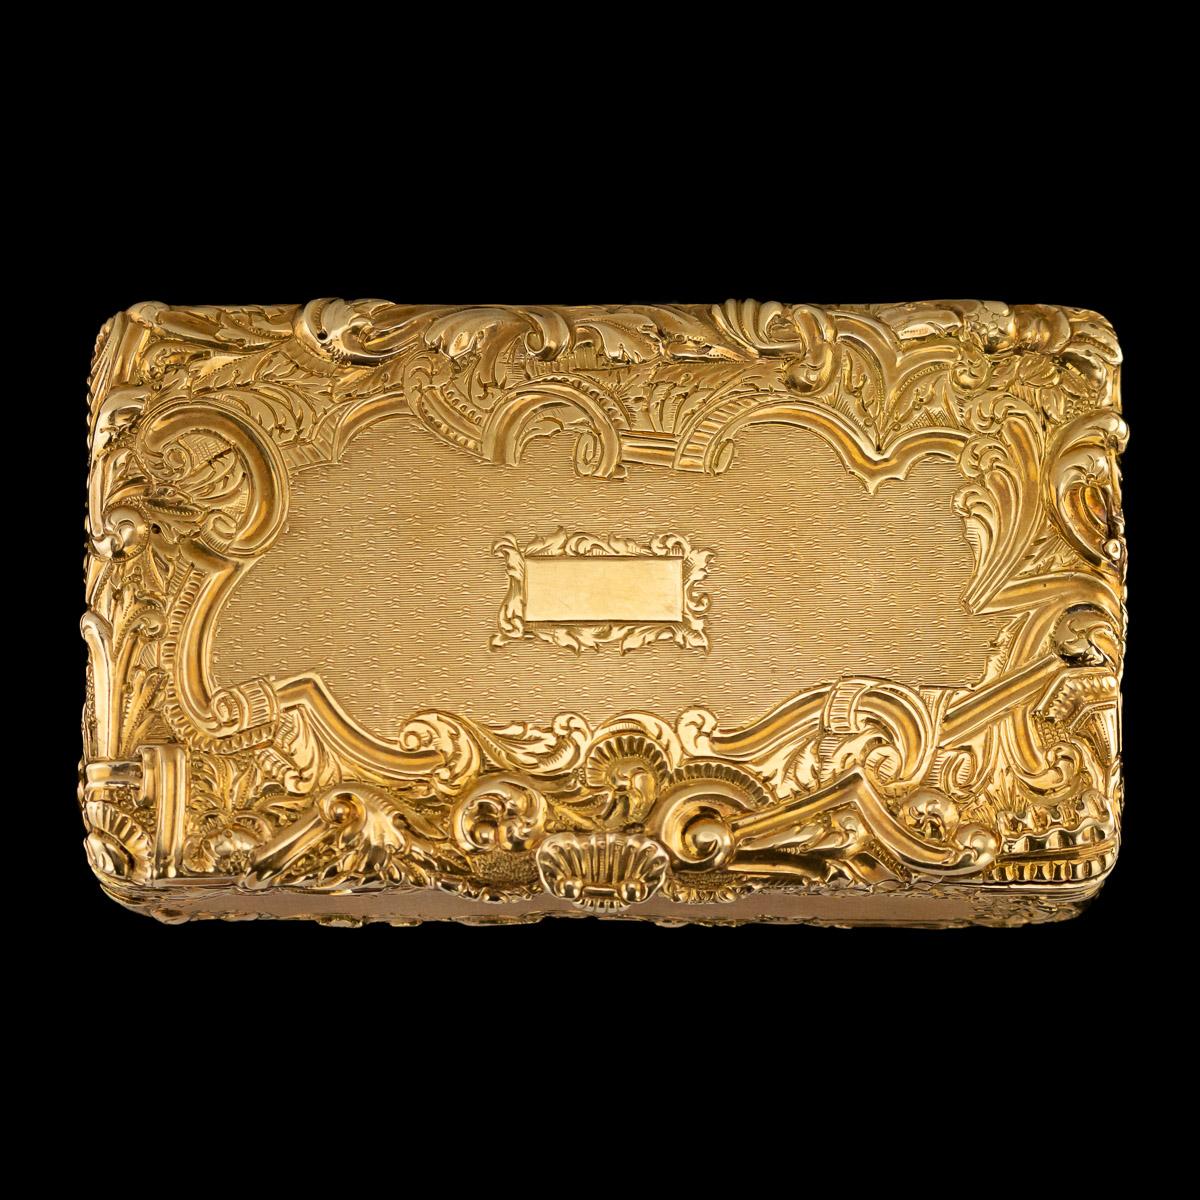 Antique mid-19th century French 18-karat solid gold snuff box, rectangular shaped, engraved with scrolls and flowers on an engine turned ground, applied with a shell thumbpiece. Hallmarked with French marks (tested 750 standard), Paris, Maker JY